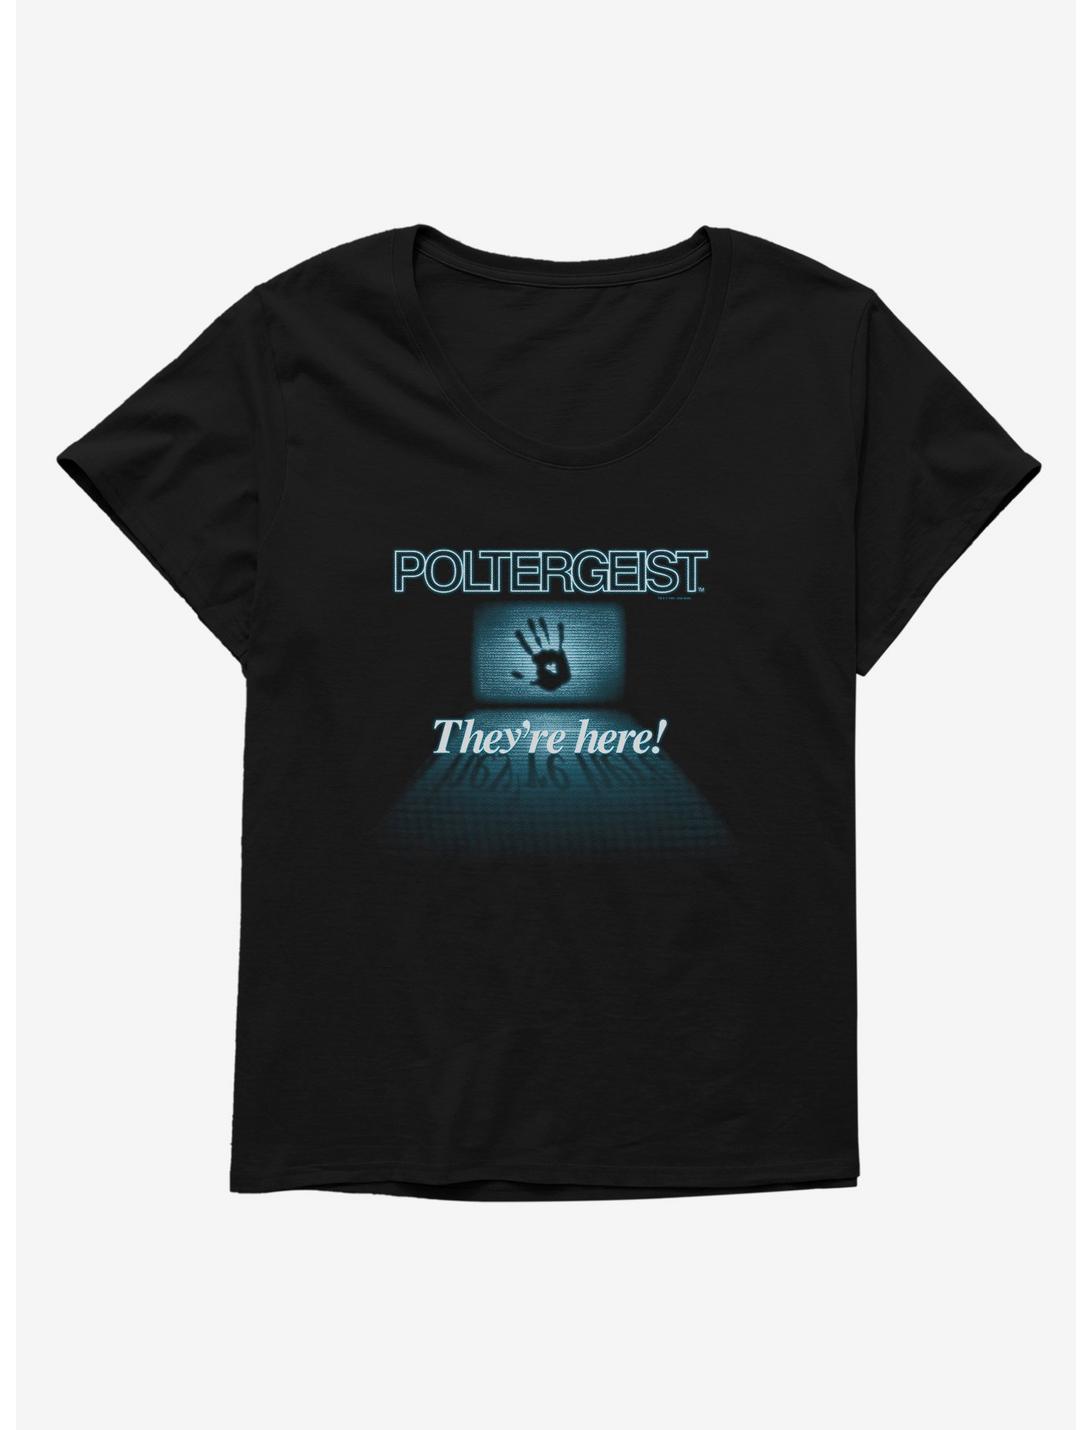 Poltergeist They're Here! Girls T-Shirt Plus Size, BLACK, hi-res